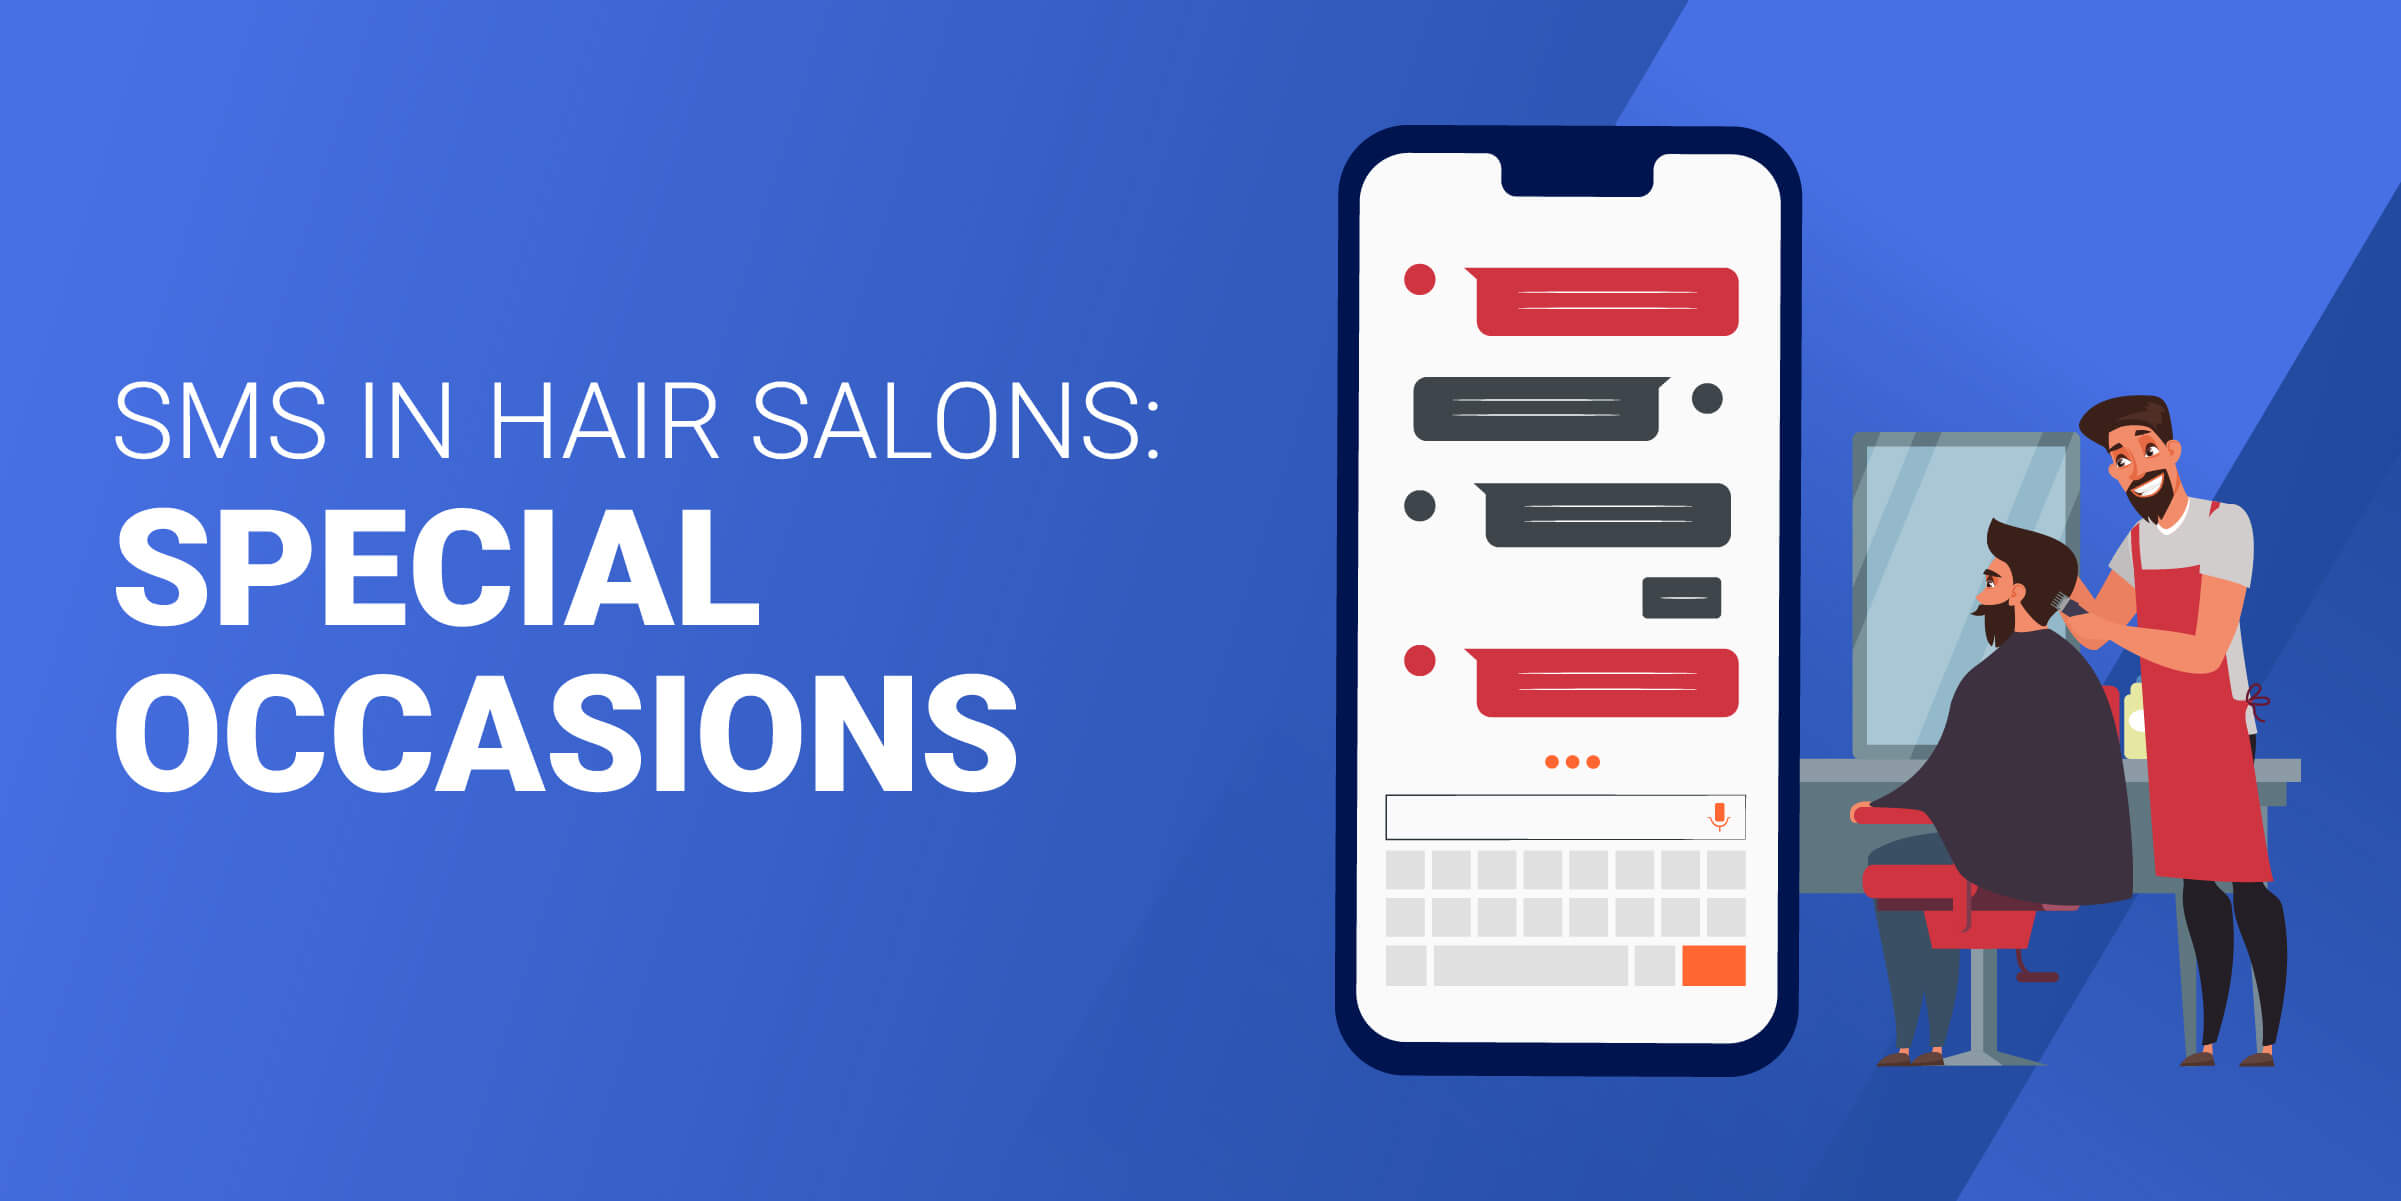 SMS in Hair Salons Special Occasions